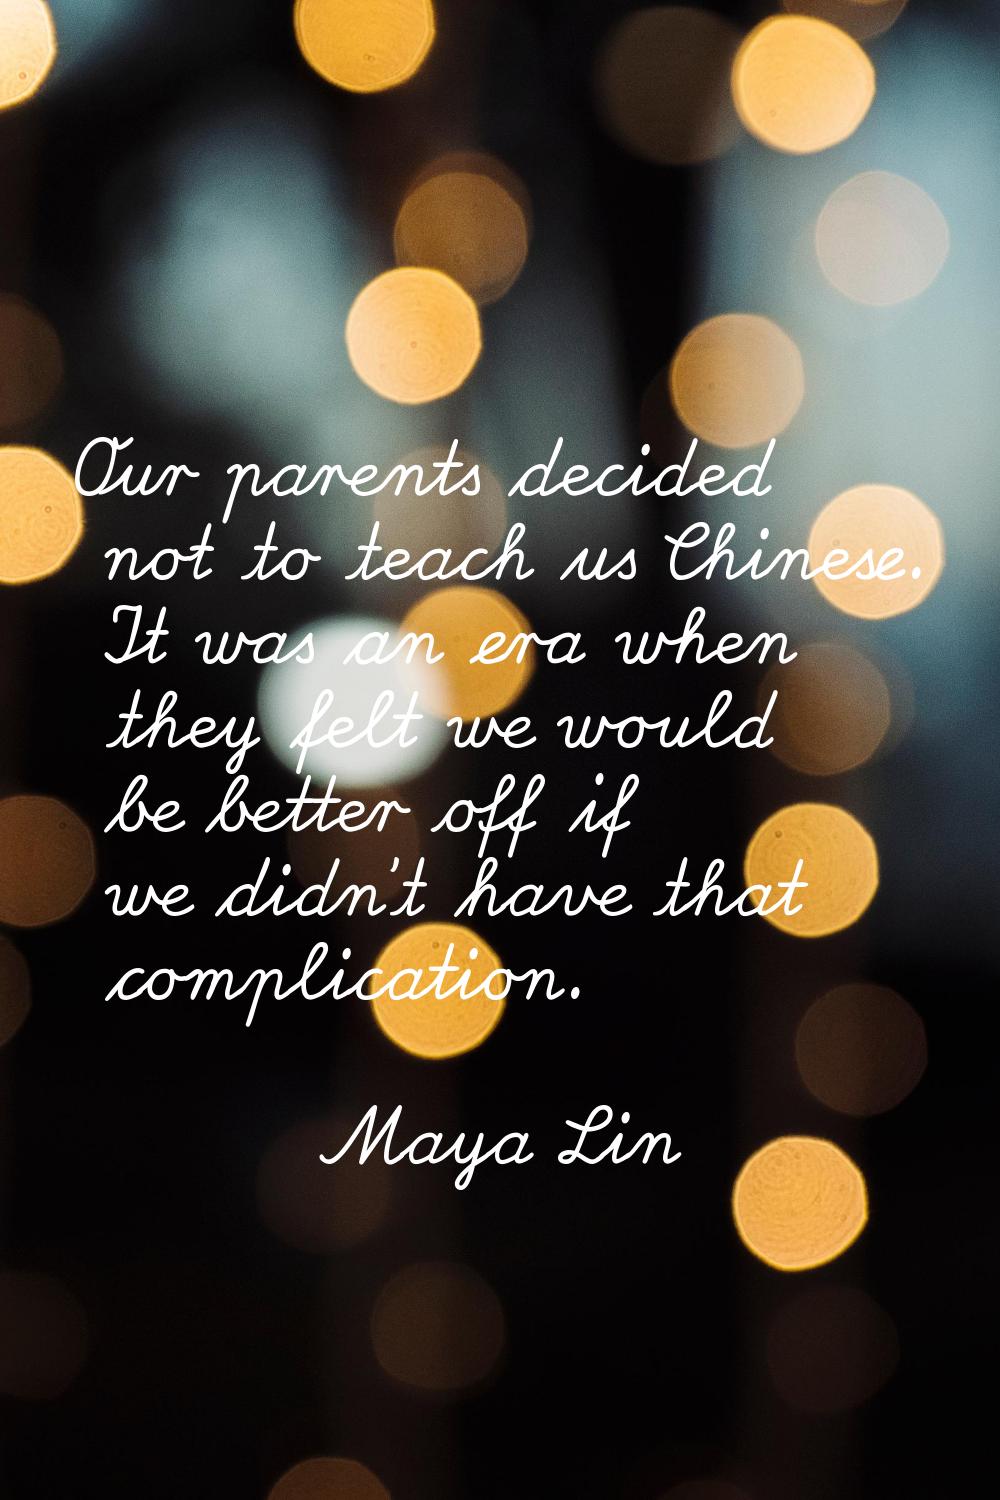 Our parents decided not to teach us Chinese. It was an era when they felt we would be better off if